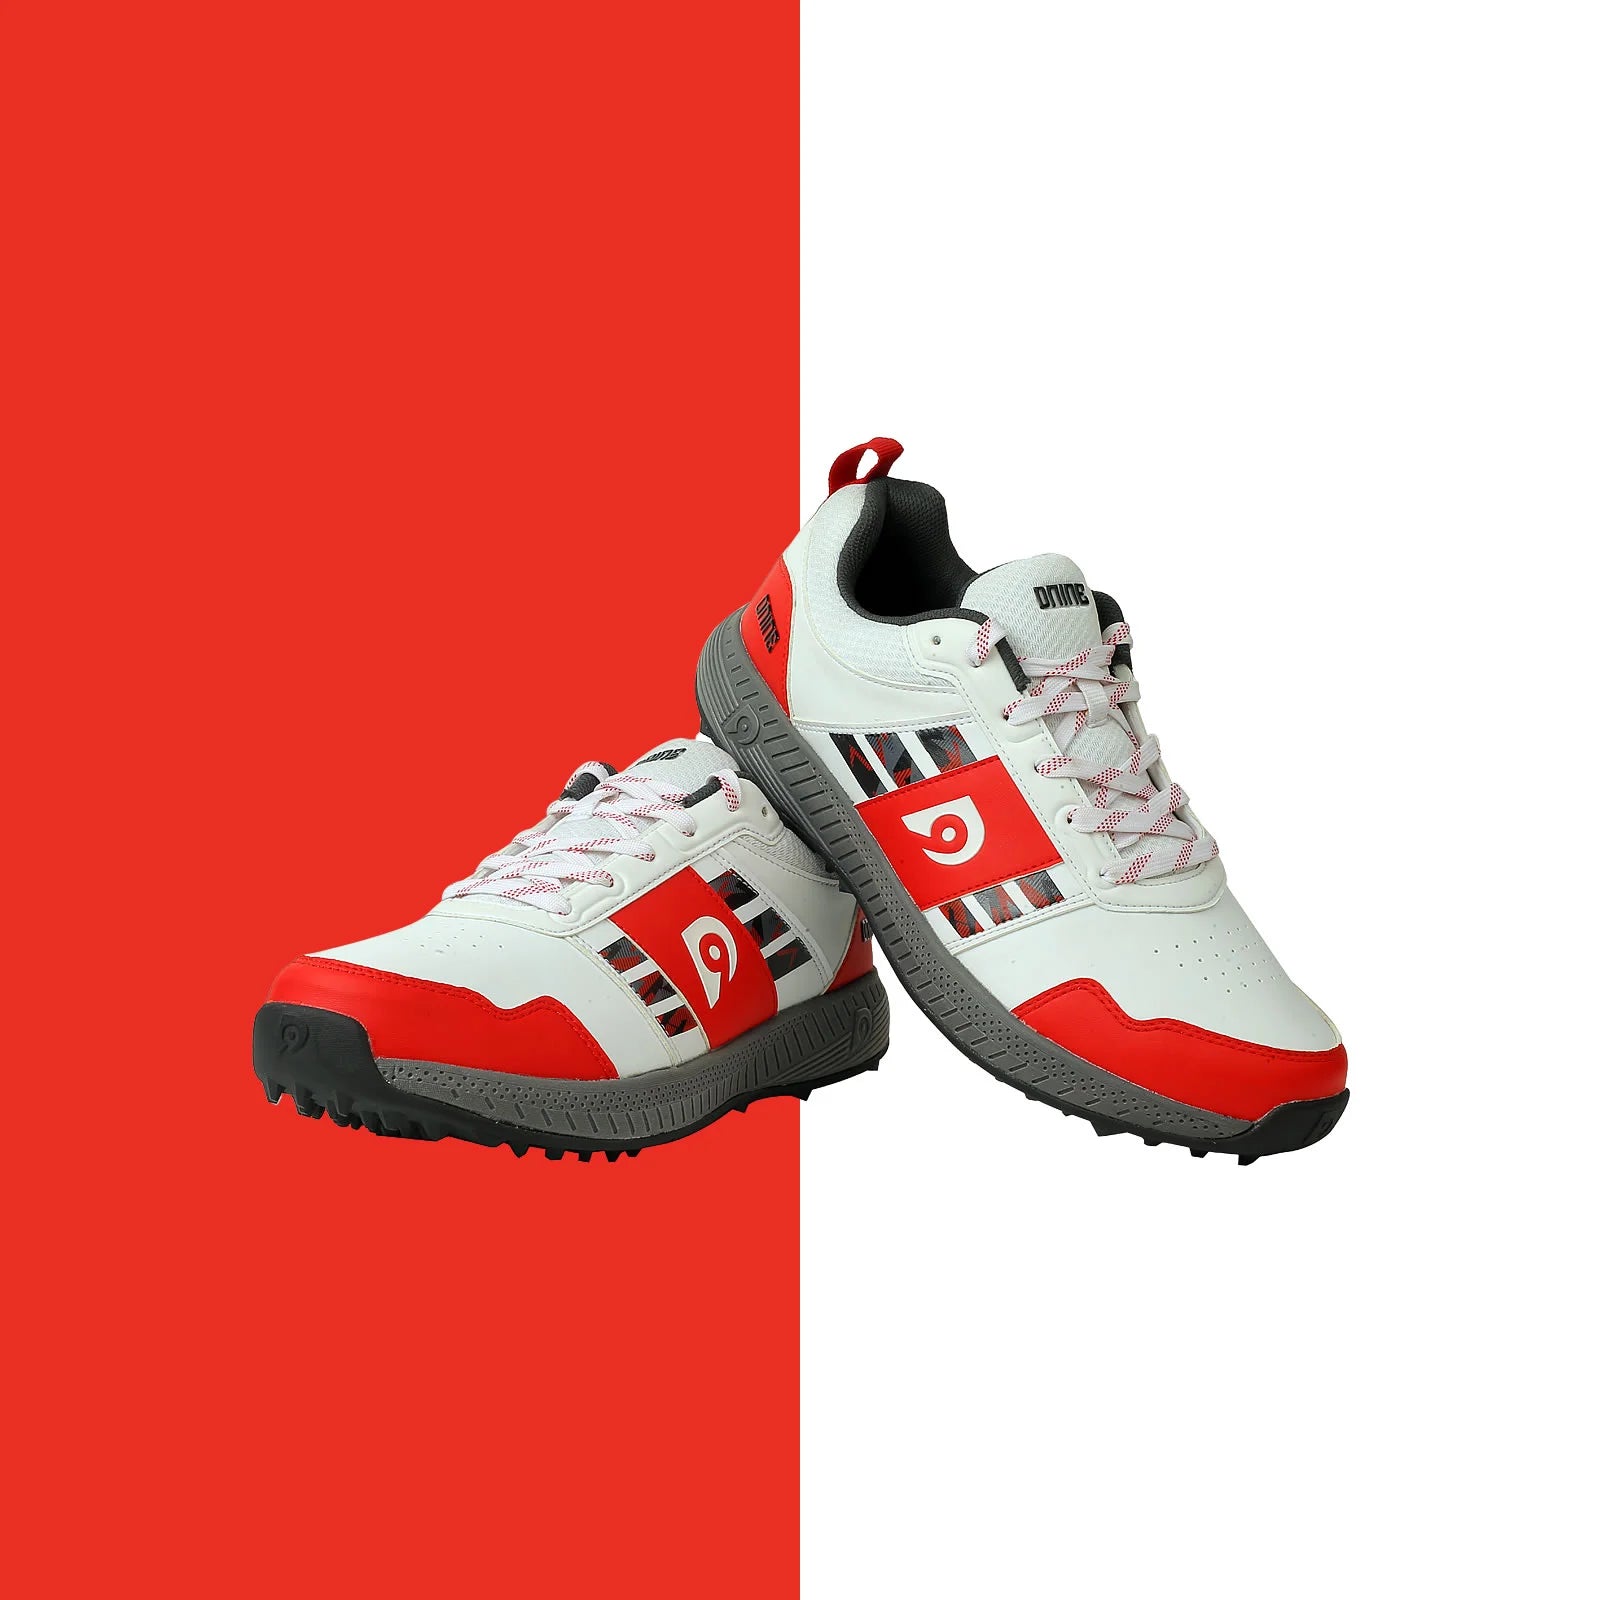 DNINE Polyurethane (PU) Prince-1 Red/White Cricket Rubber Spike Shoes